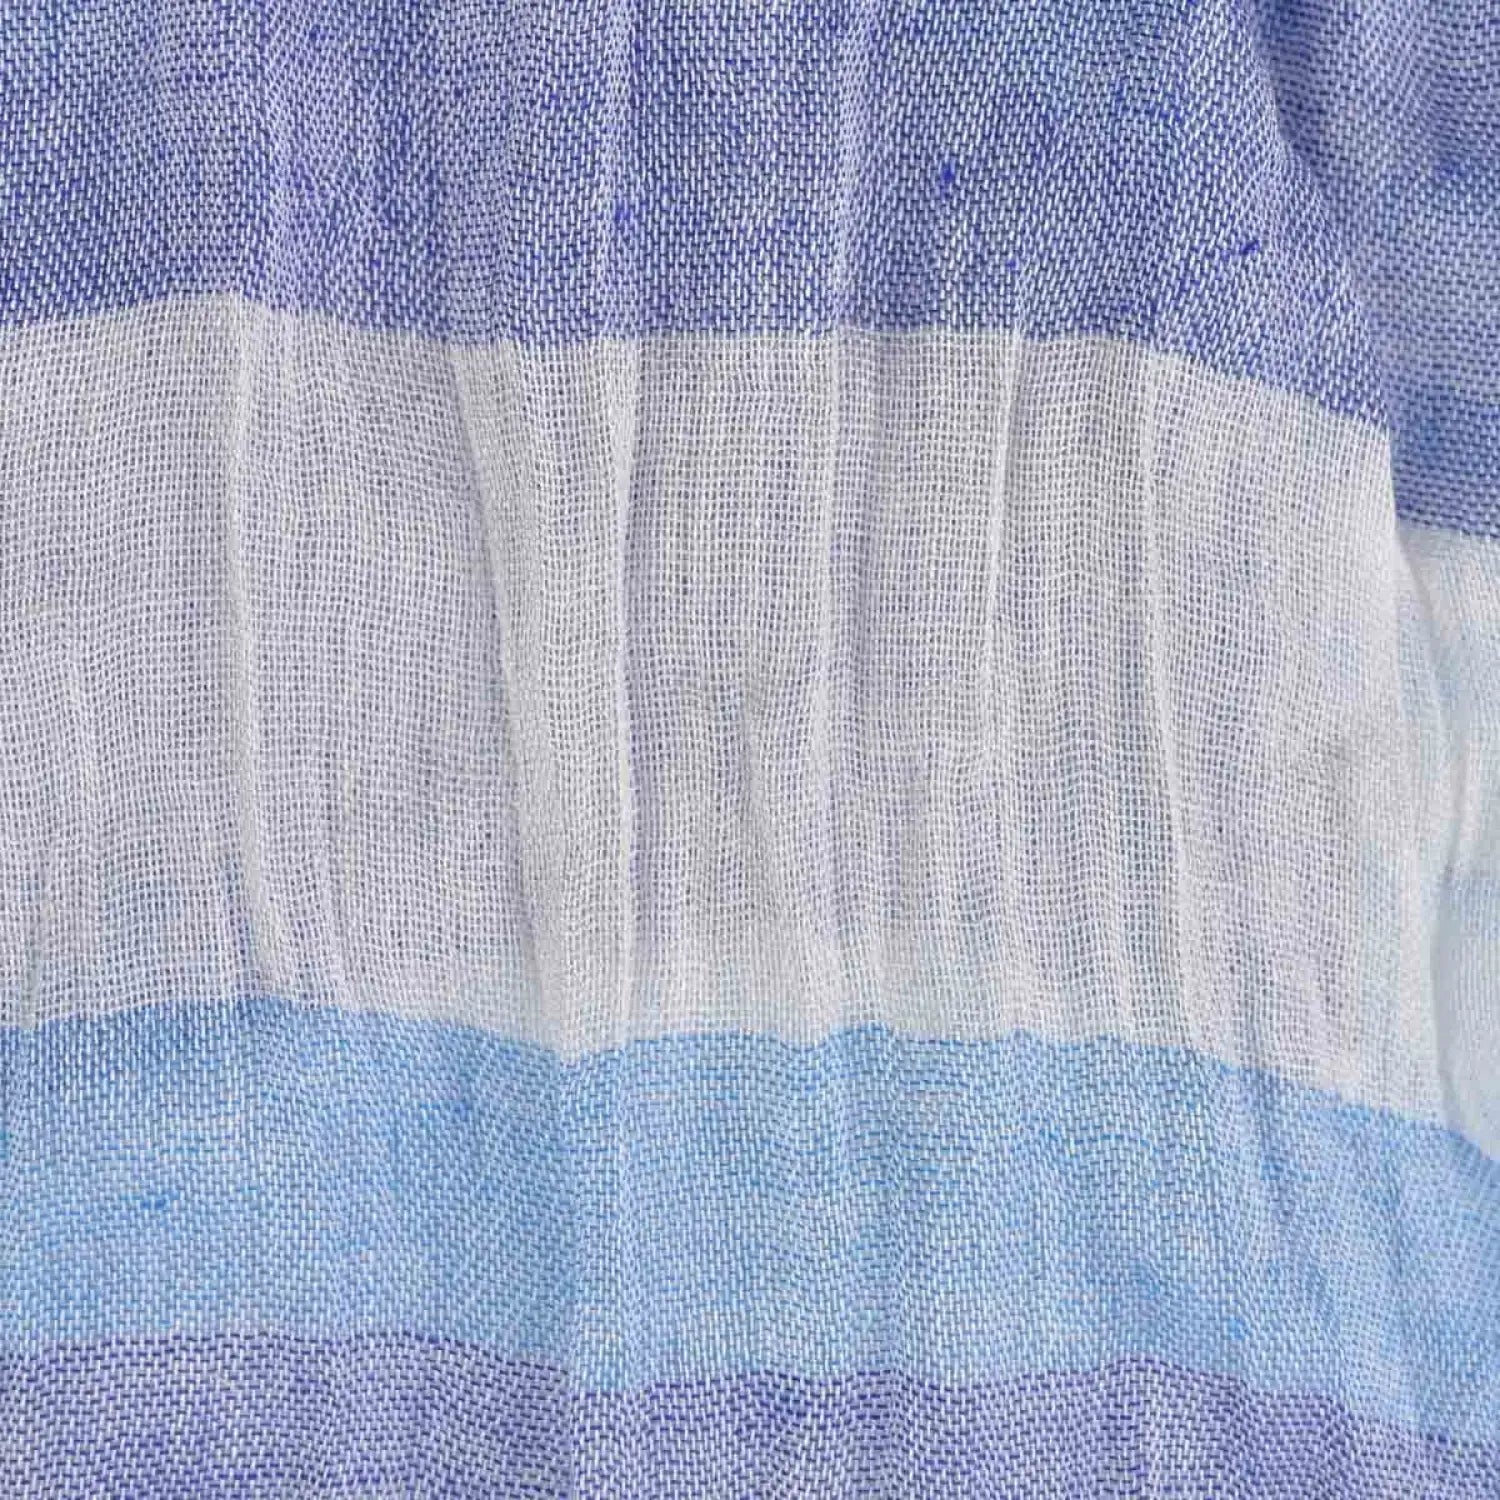 Bold Striped Crinkled Scarf with Tassels in Blue and White Color